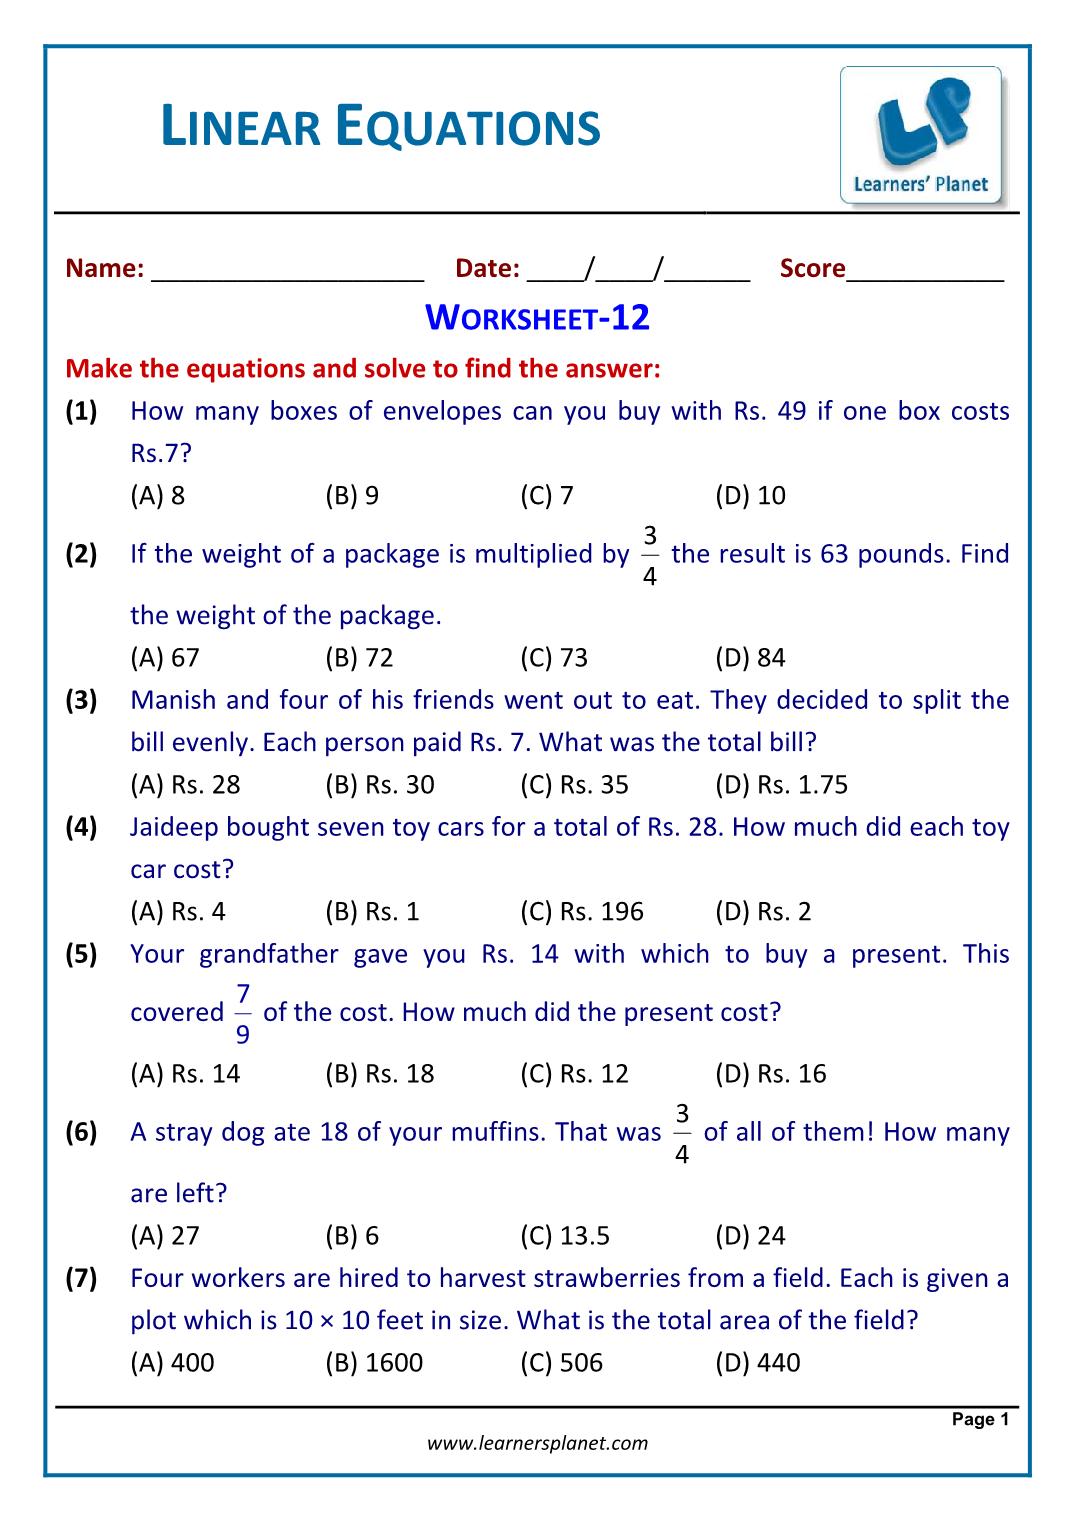 Solve linear equations word problems worksheet grade 22 Within Linear Word Problems Worksheet